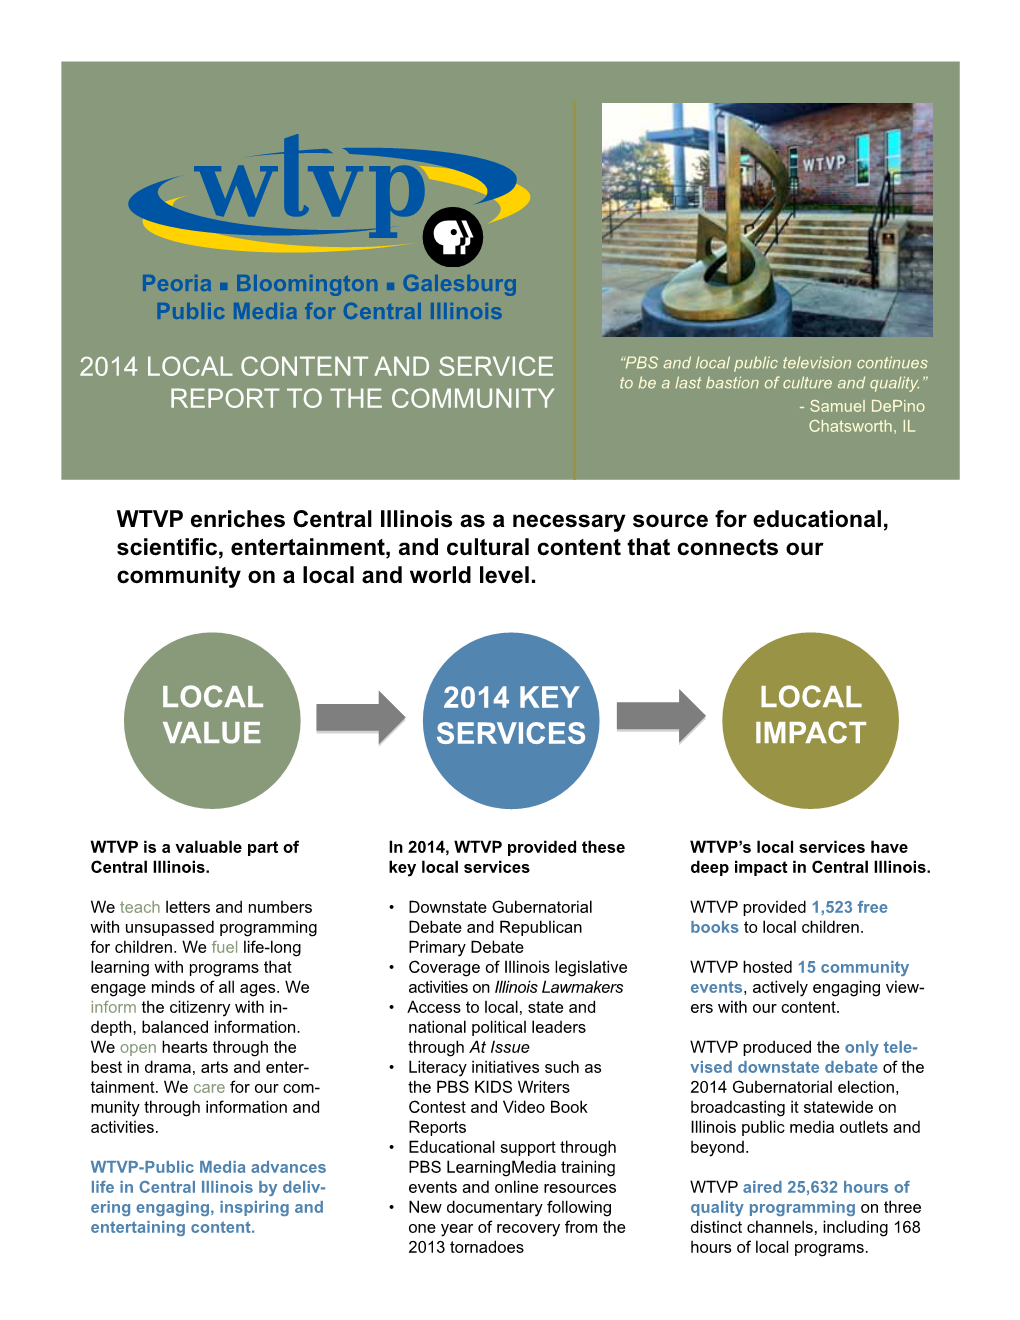 Local Value 2014 Key Services Local Impact